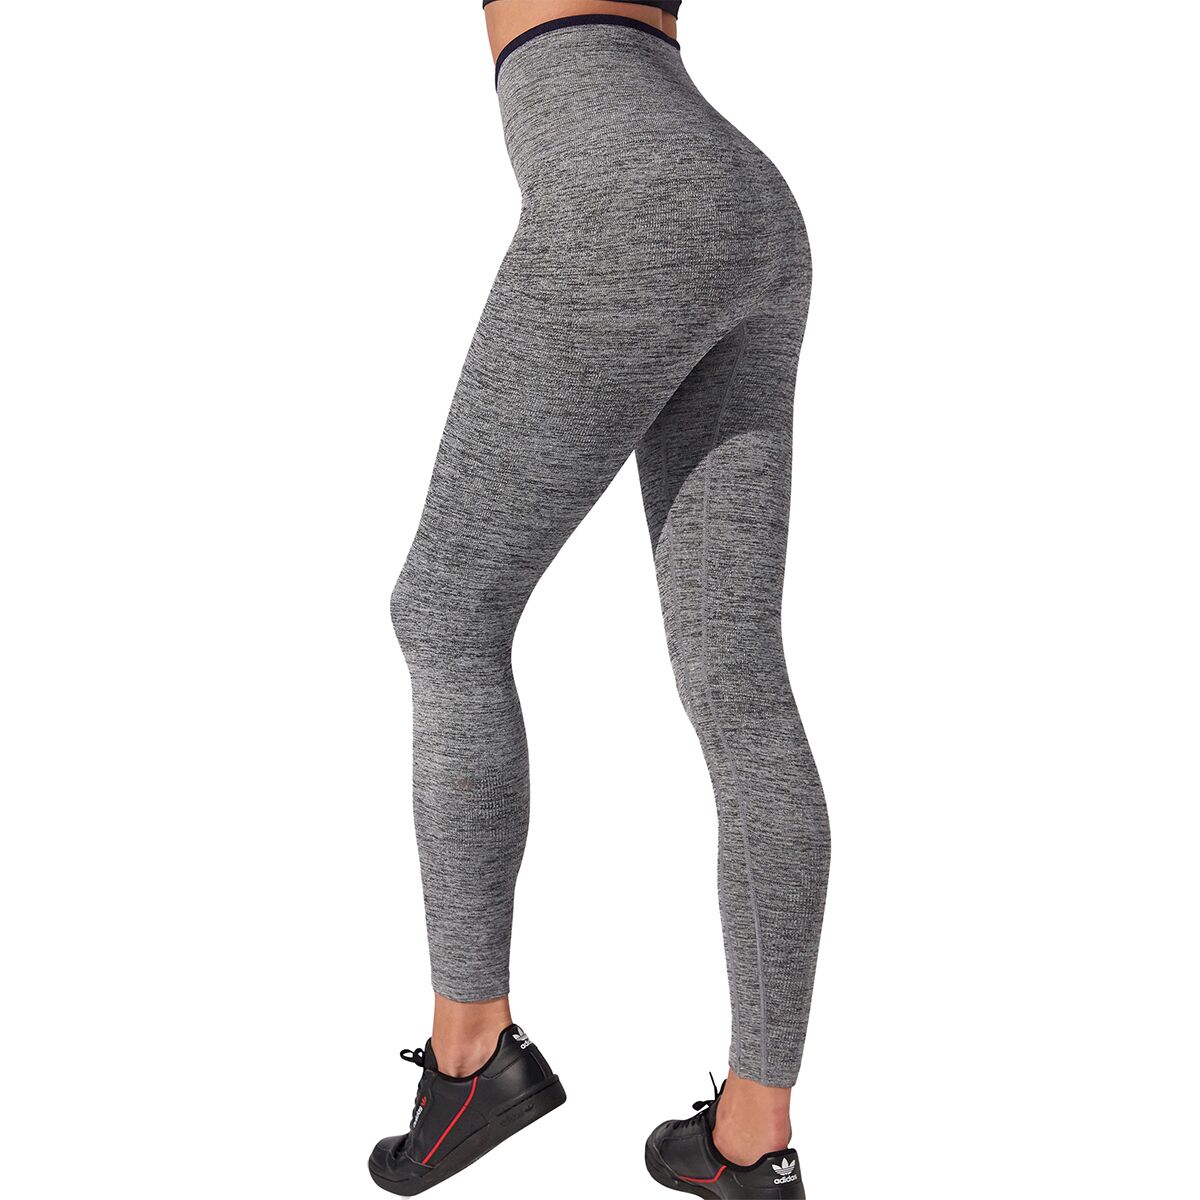 Pin on Women's Sport & Fitness Clothing